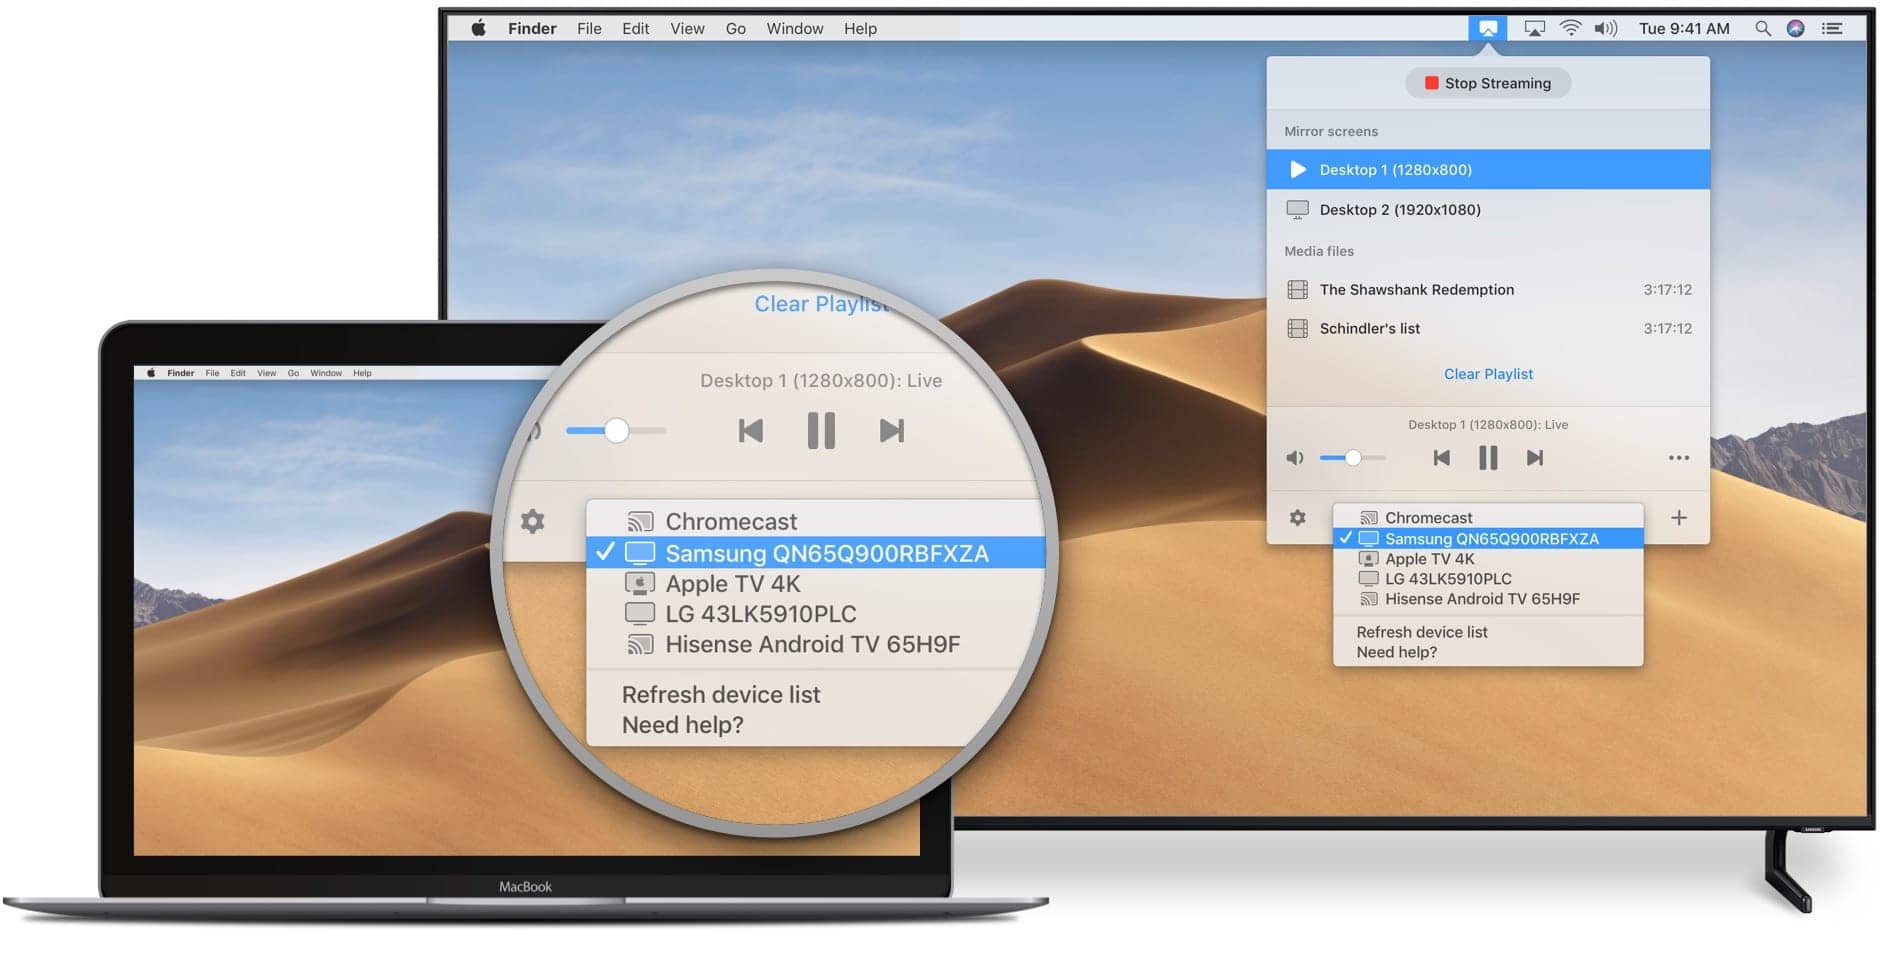 Free screen mirroring software for macbook